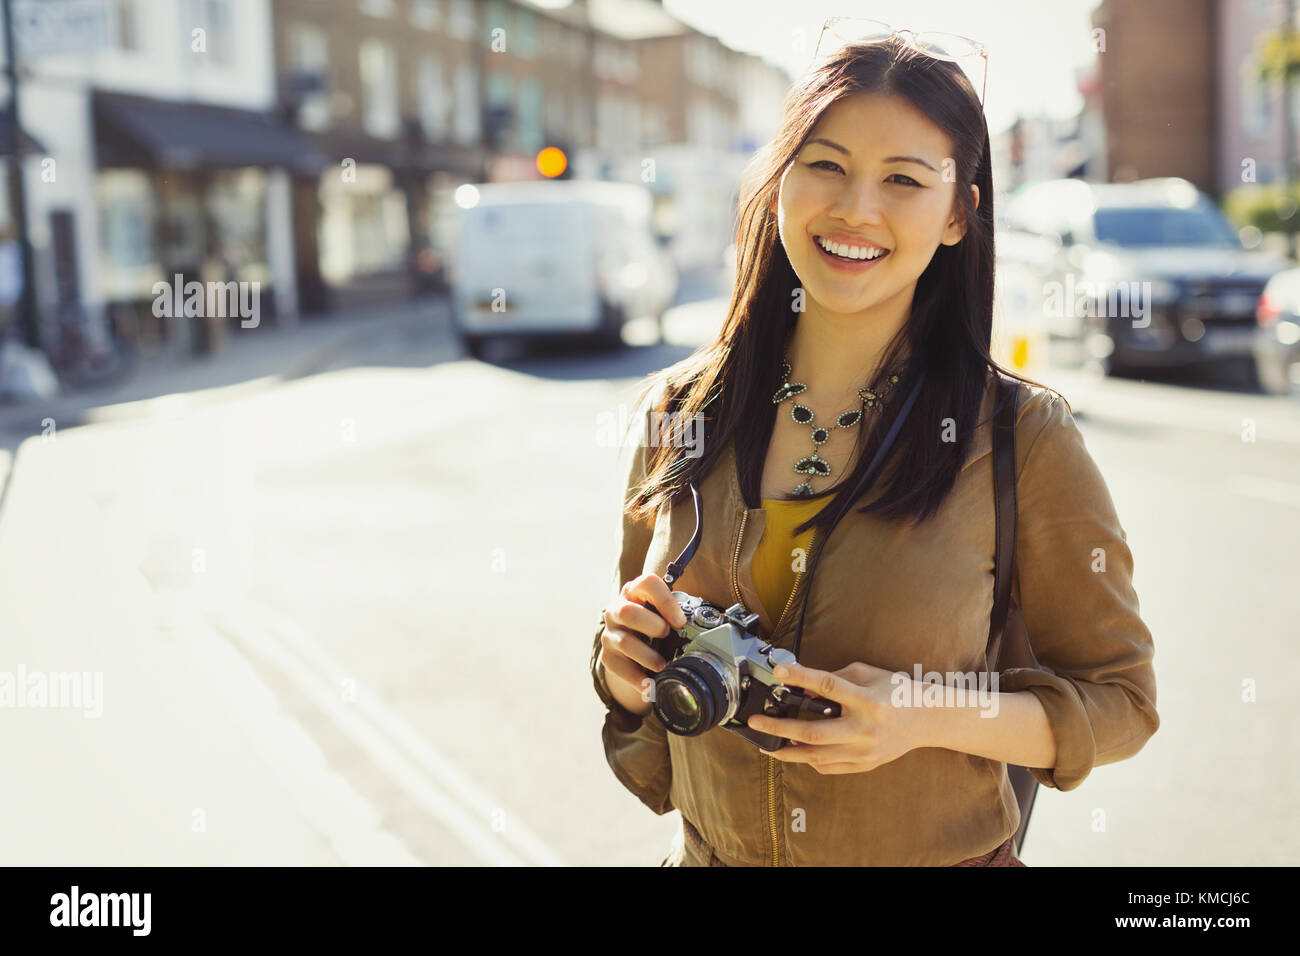 Portrait smiling, confident young female tourist with camera on sunny urban street Stock Photo